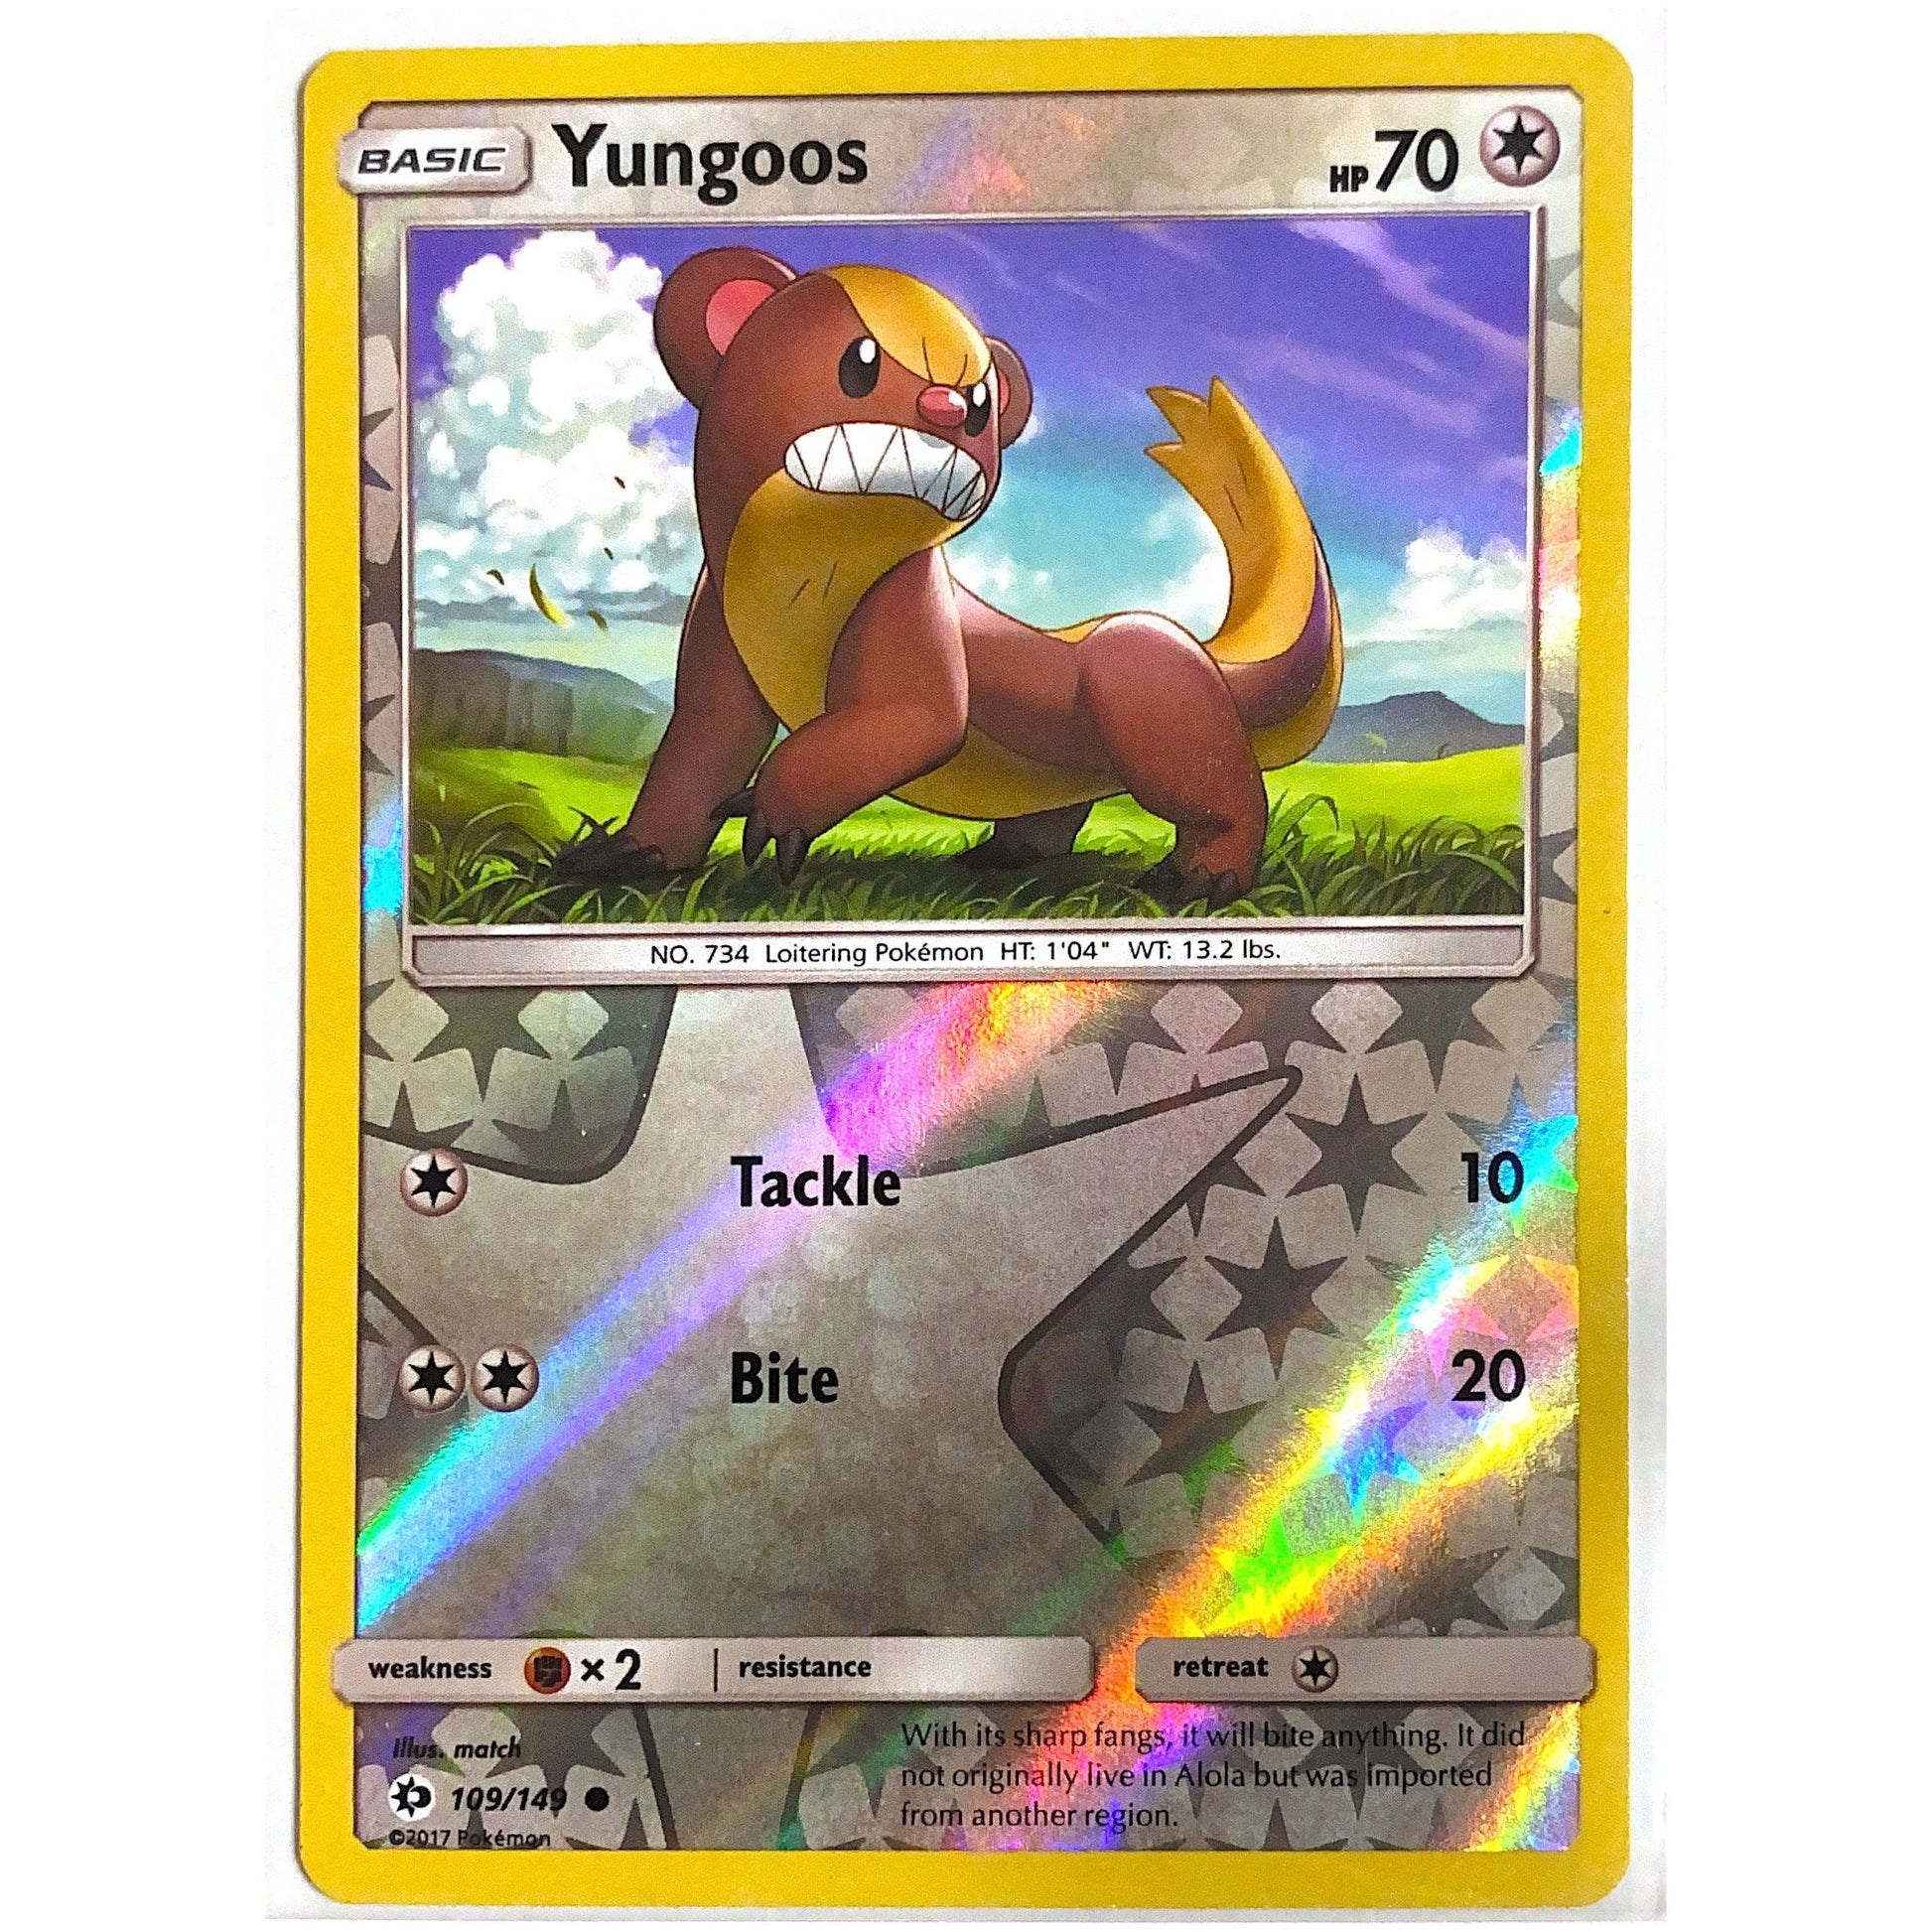  Sun & Moon Yungoos Common Reverse Holo 109/149  Local Legends Cards & Collectibles